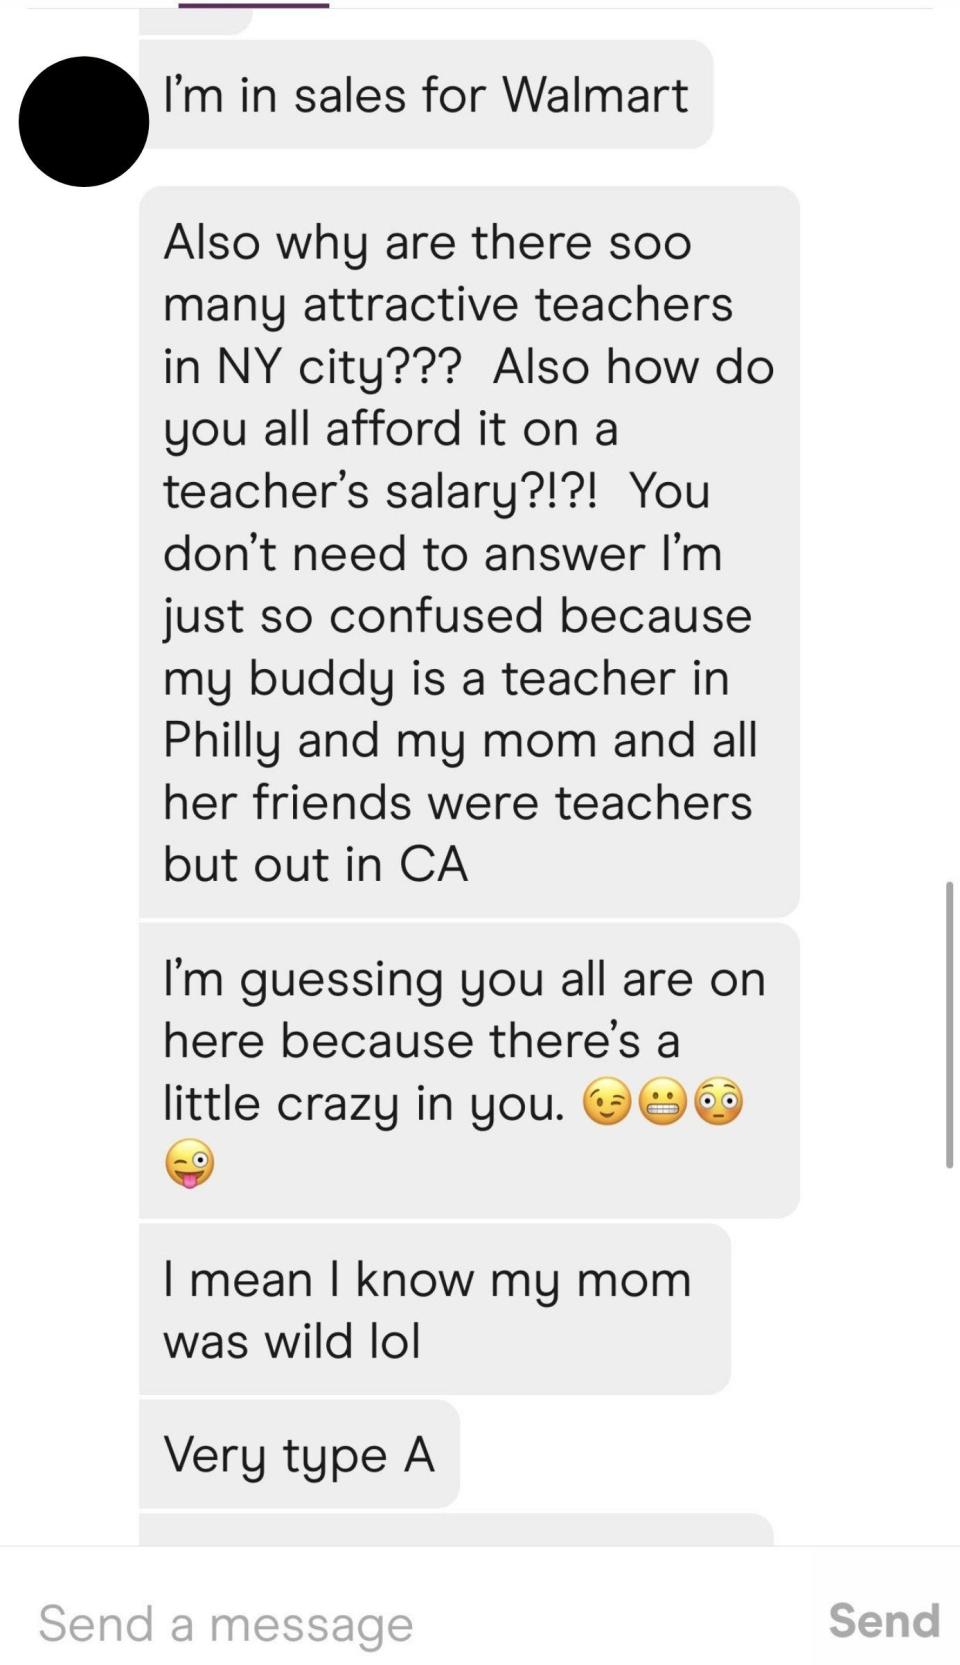 Someone asks a woman why there are so many attractive teachers in New York, says his mom was a teacher in Los Angeles, and that the woman must have "a little crazy in you" because his mom was wild